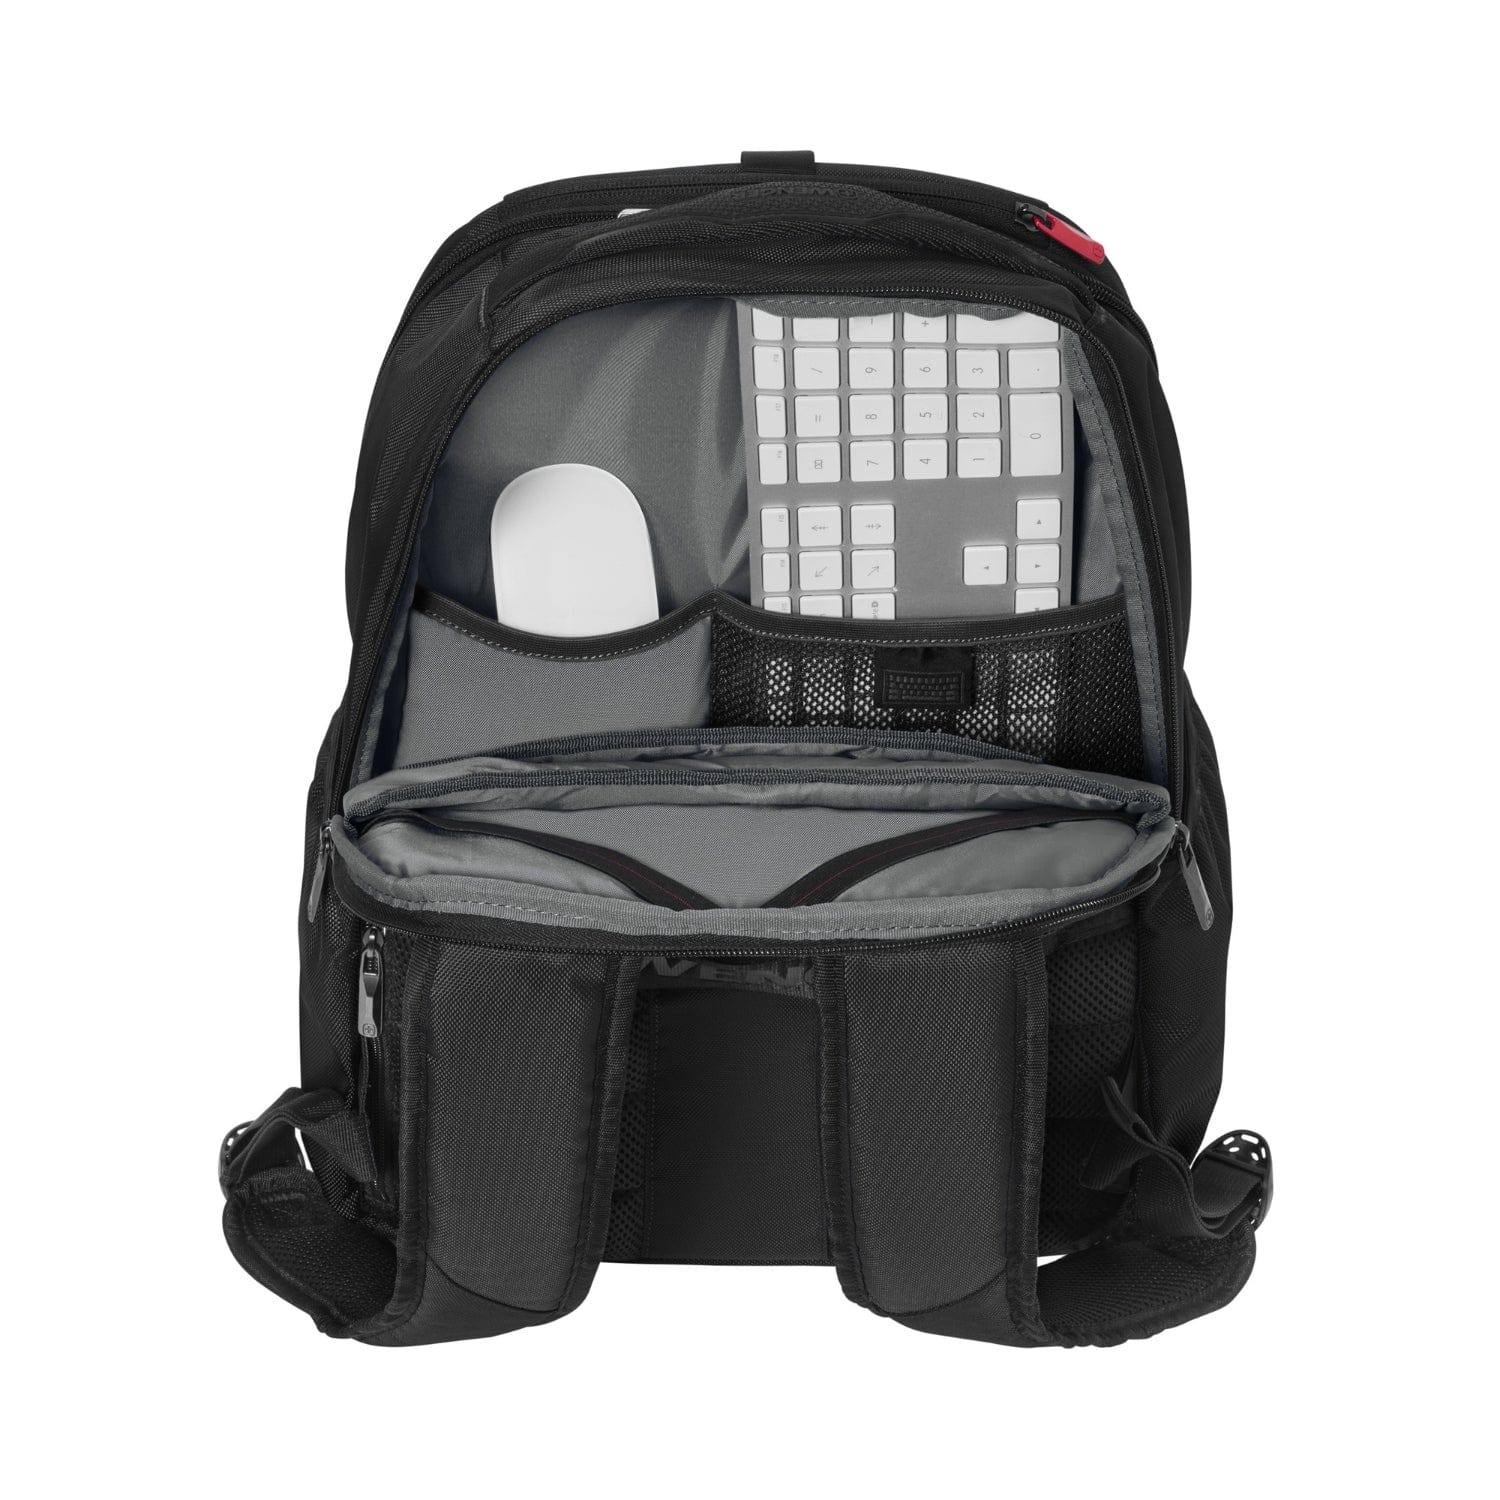 Wenger XE Professional 15.6 inch Laptop Backpack with Tablet Pocket Black - 612739